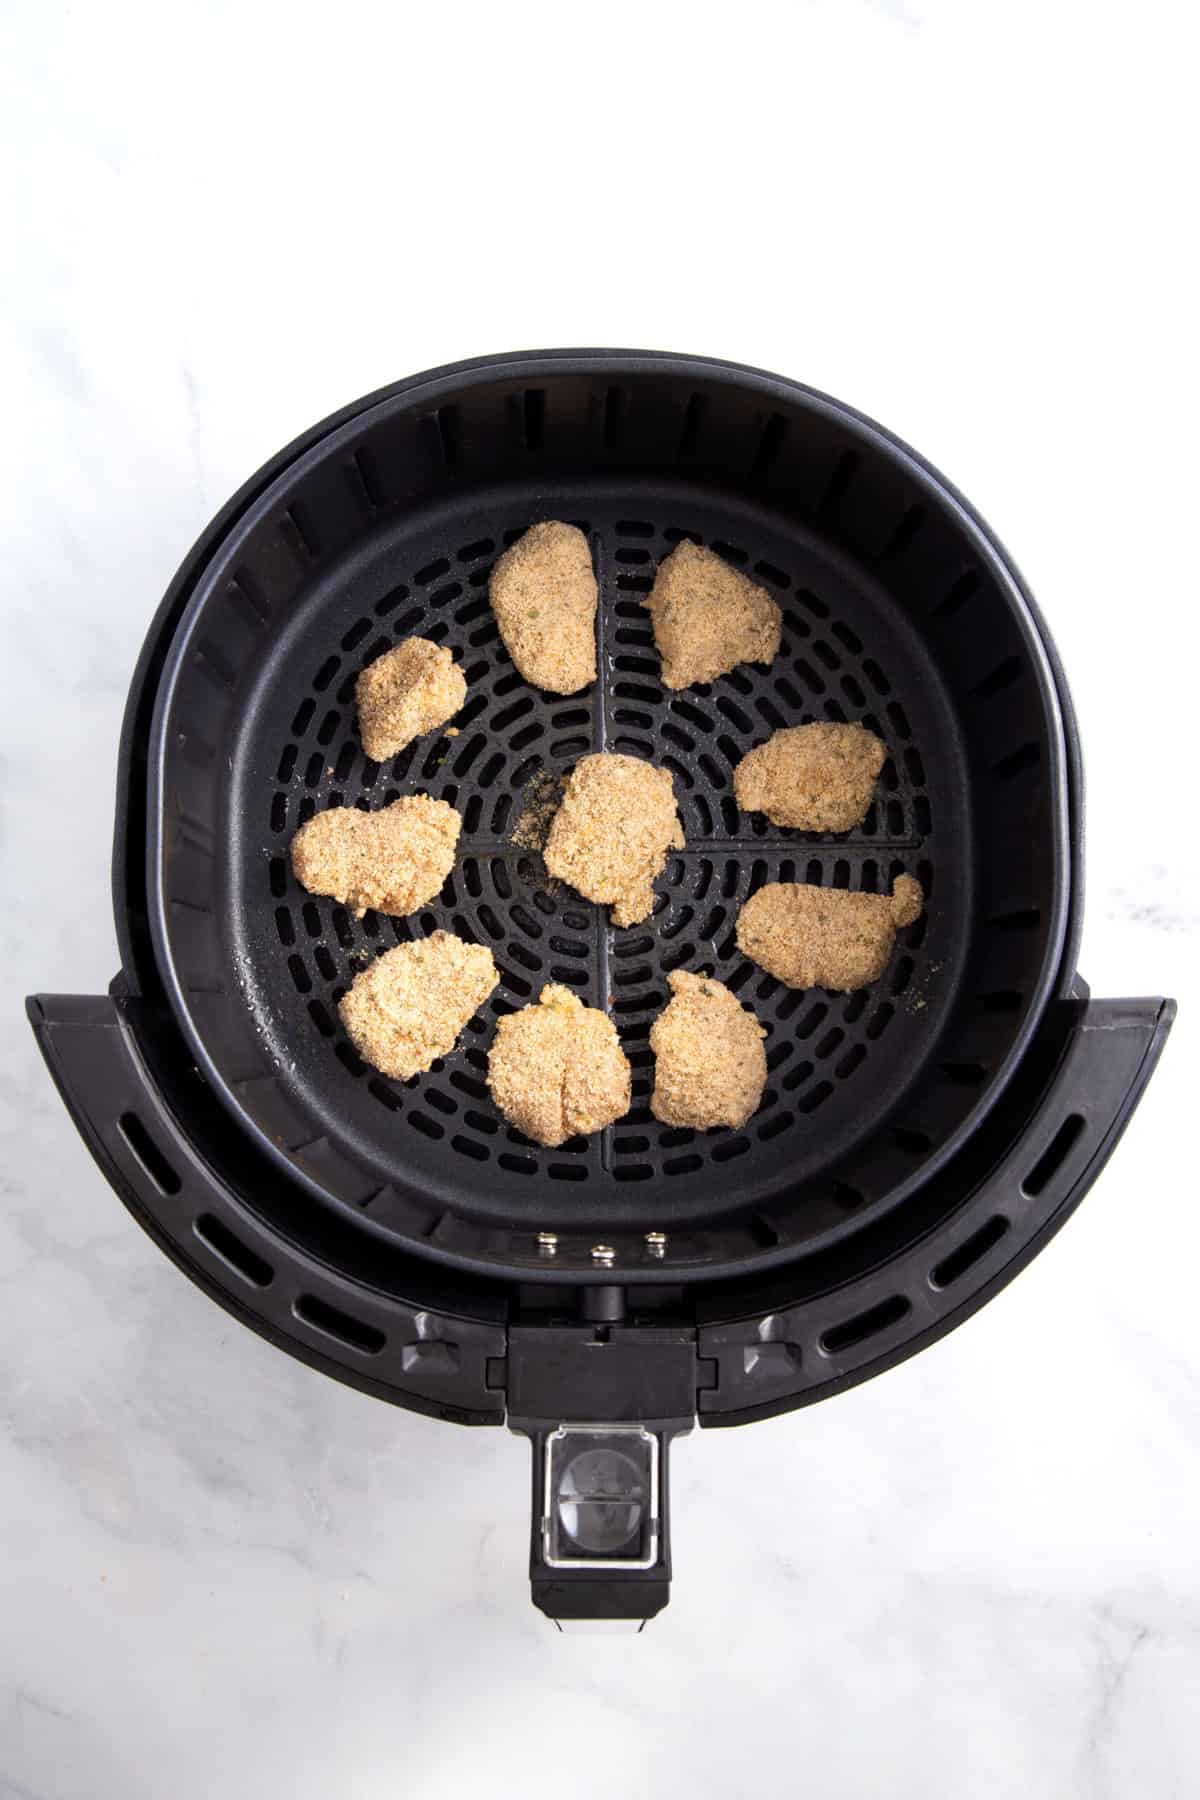 nugget sized chicken pieces coated in flour and dredged in an egg mixture, then coated with  a breadcrumb mixture sitting in an air fryer